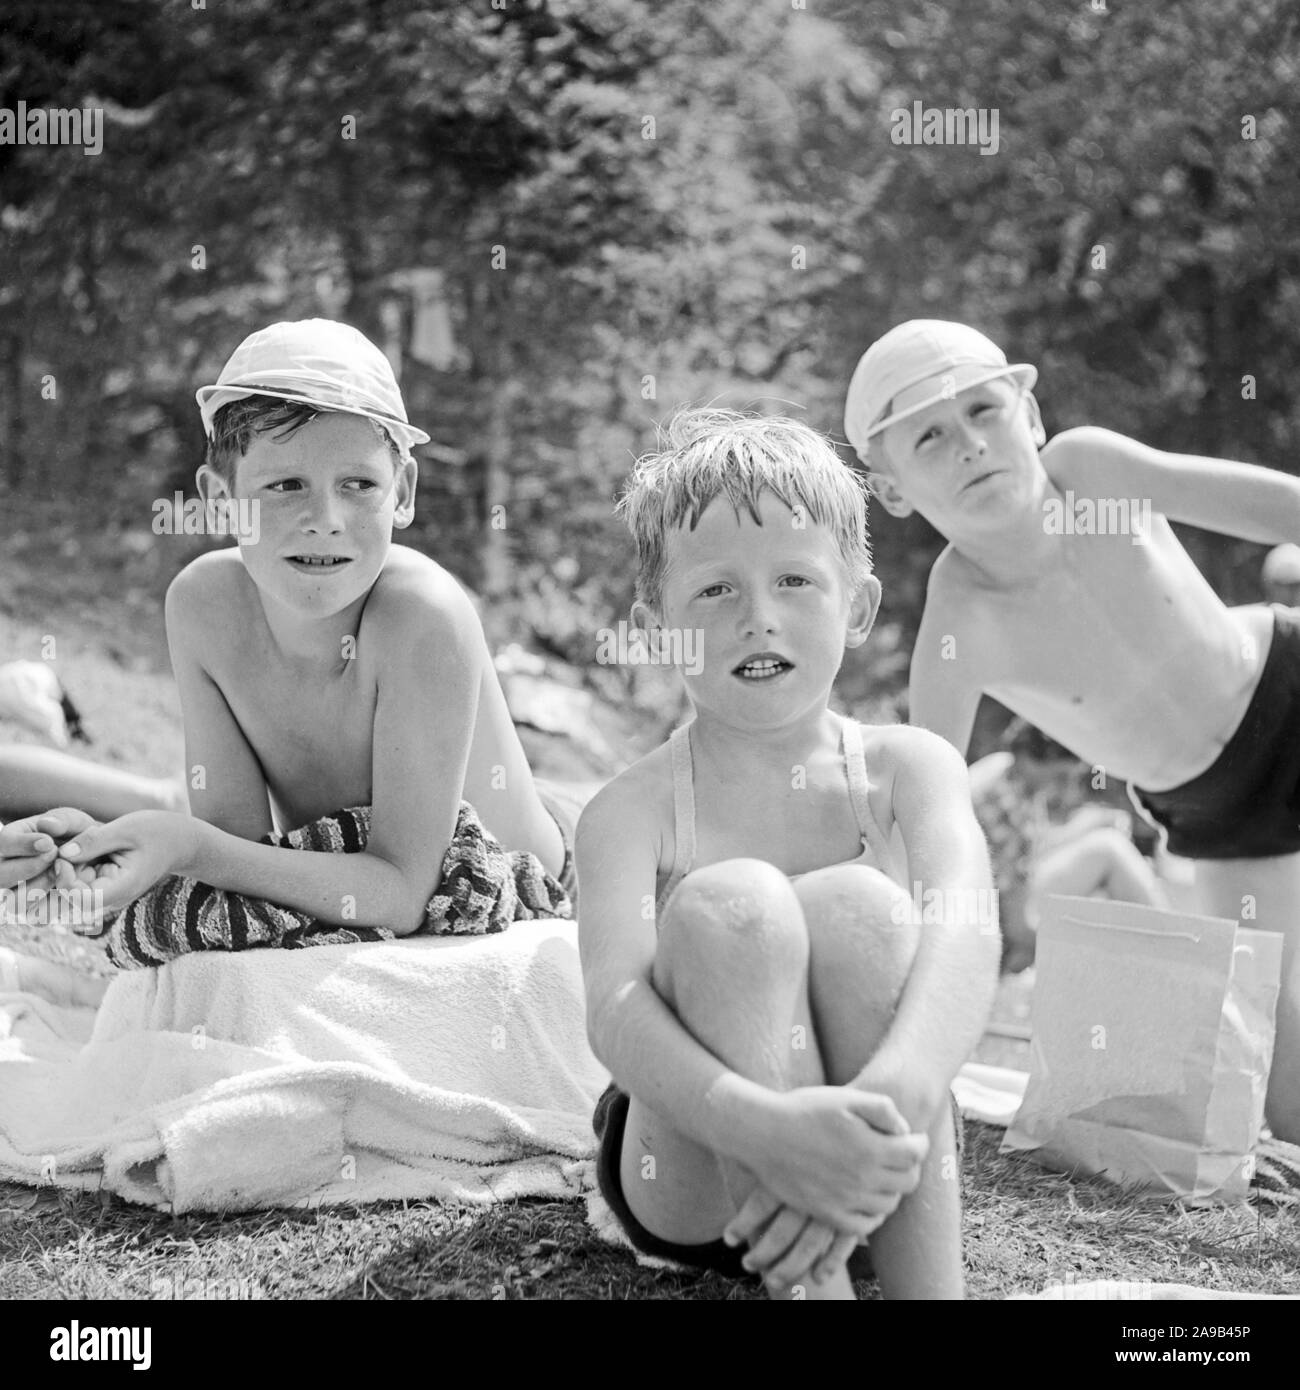 Three boys spending the day at Lautersee lake near Mittenwald, Germany 1955 Stock Photo